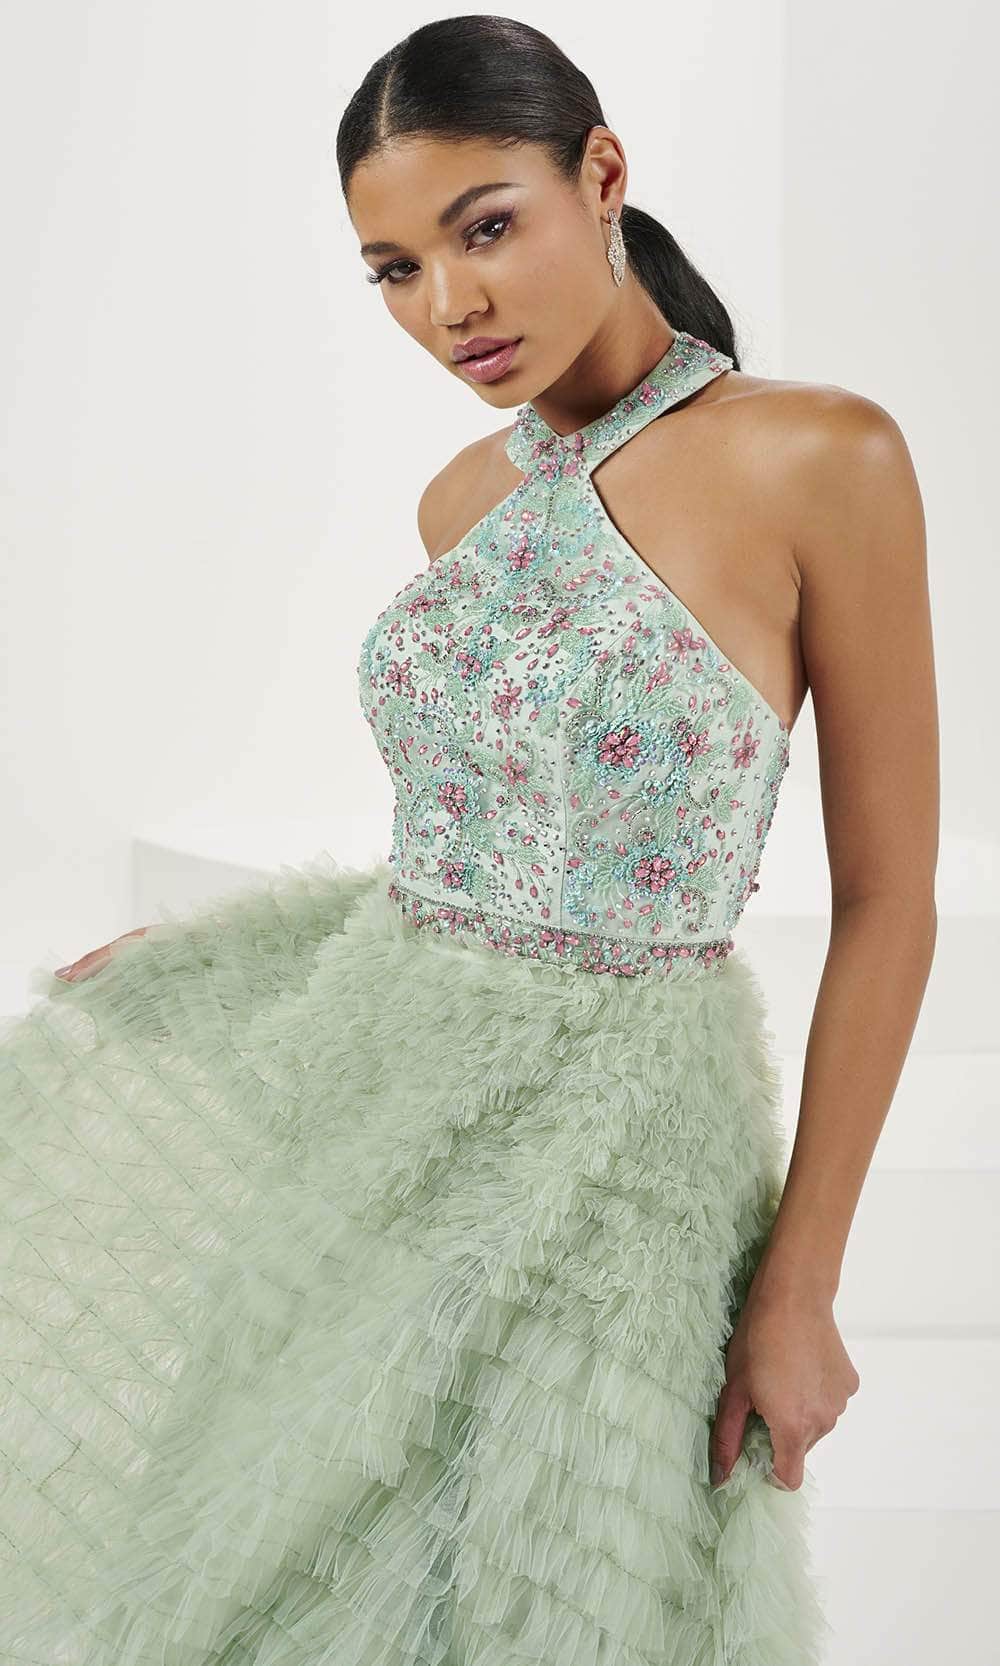 Image of Panoply 14190 - Bejeweled Halter Prom Dress